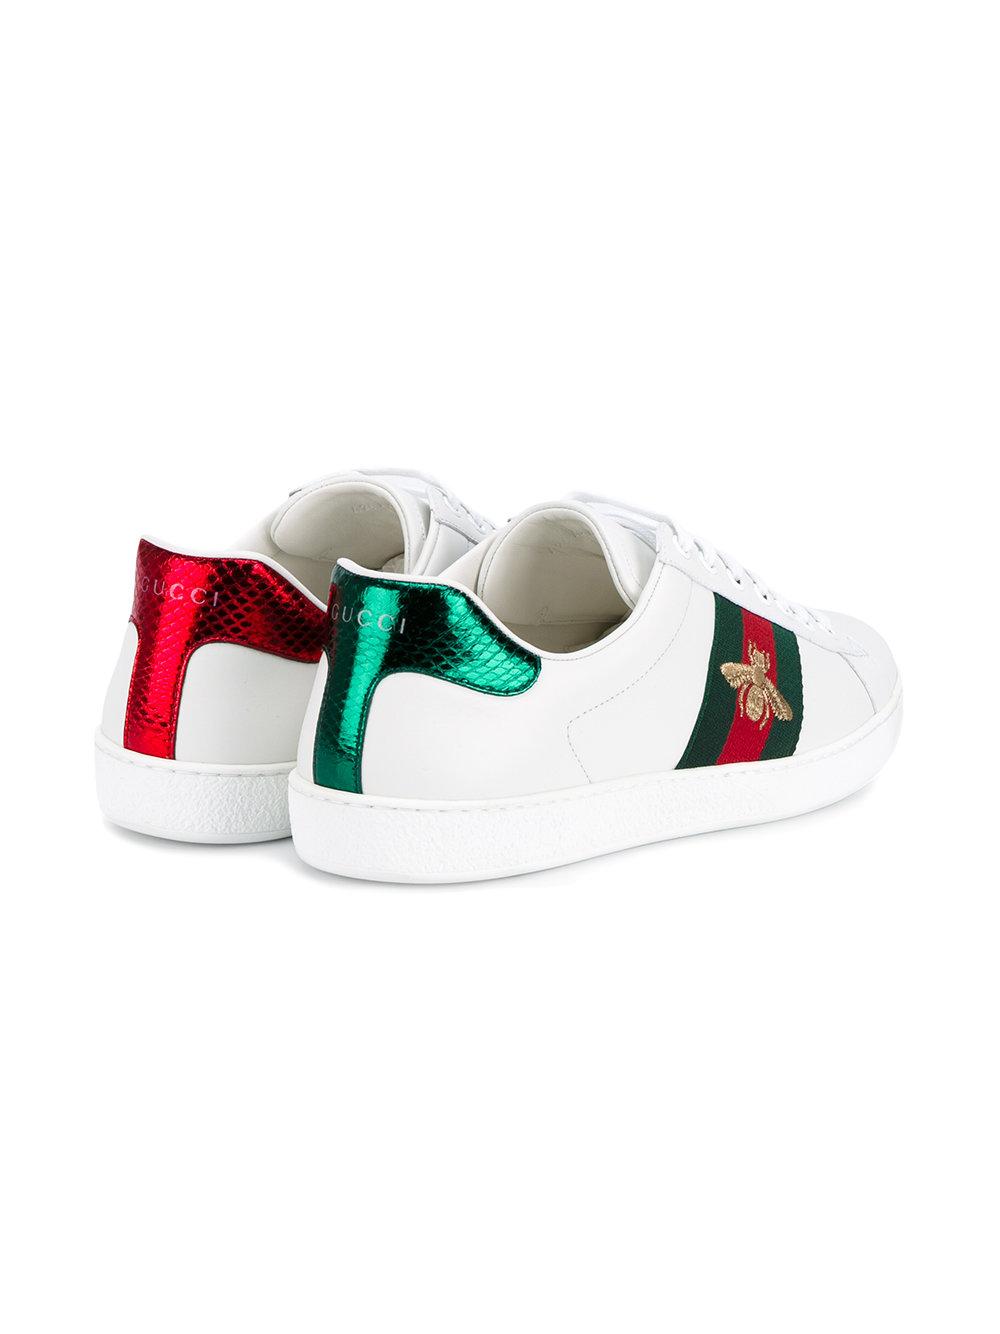 Lyst - Gucci Bee Embroidered Sneakers in White for Men